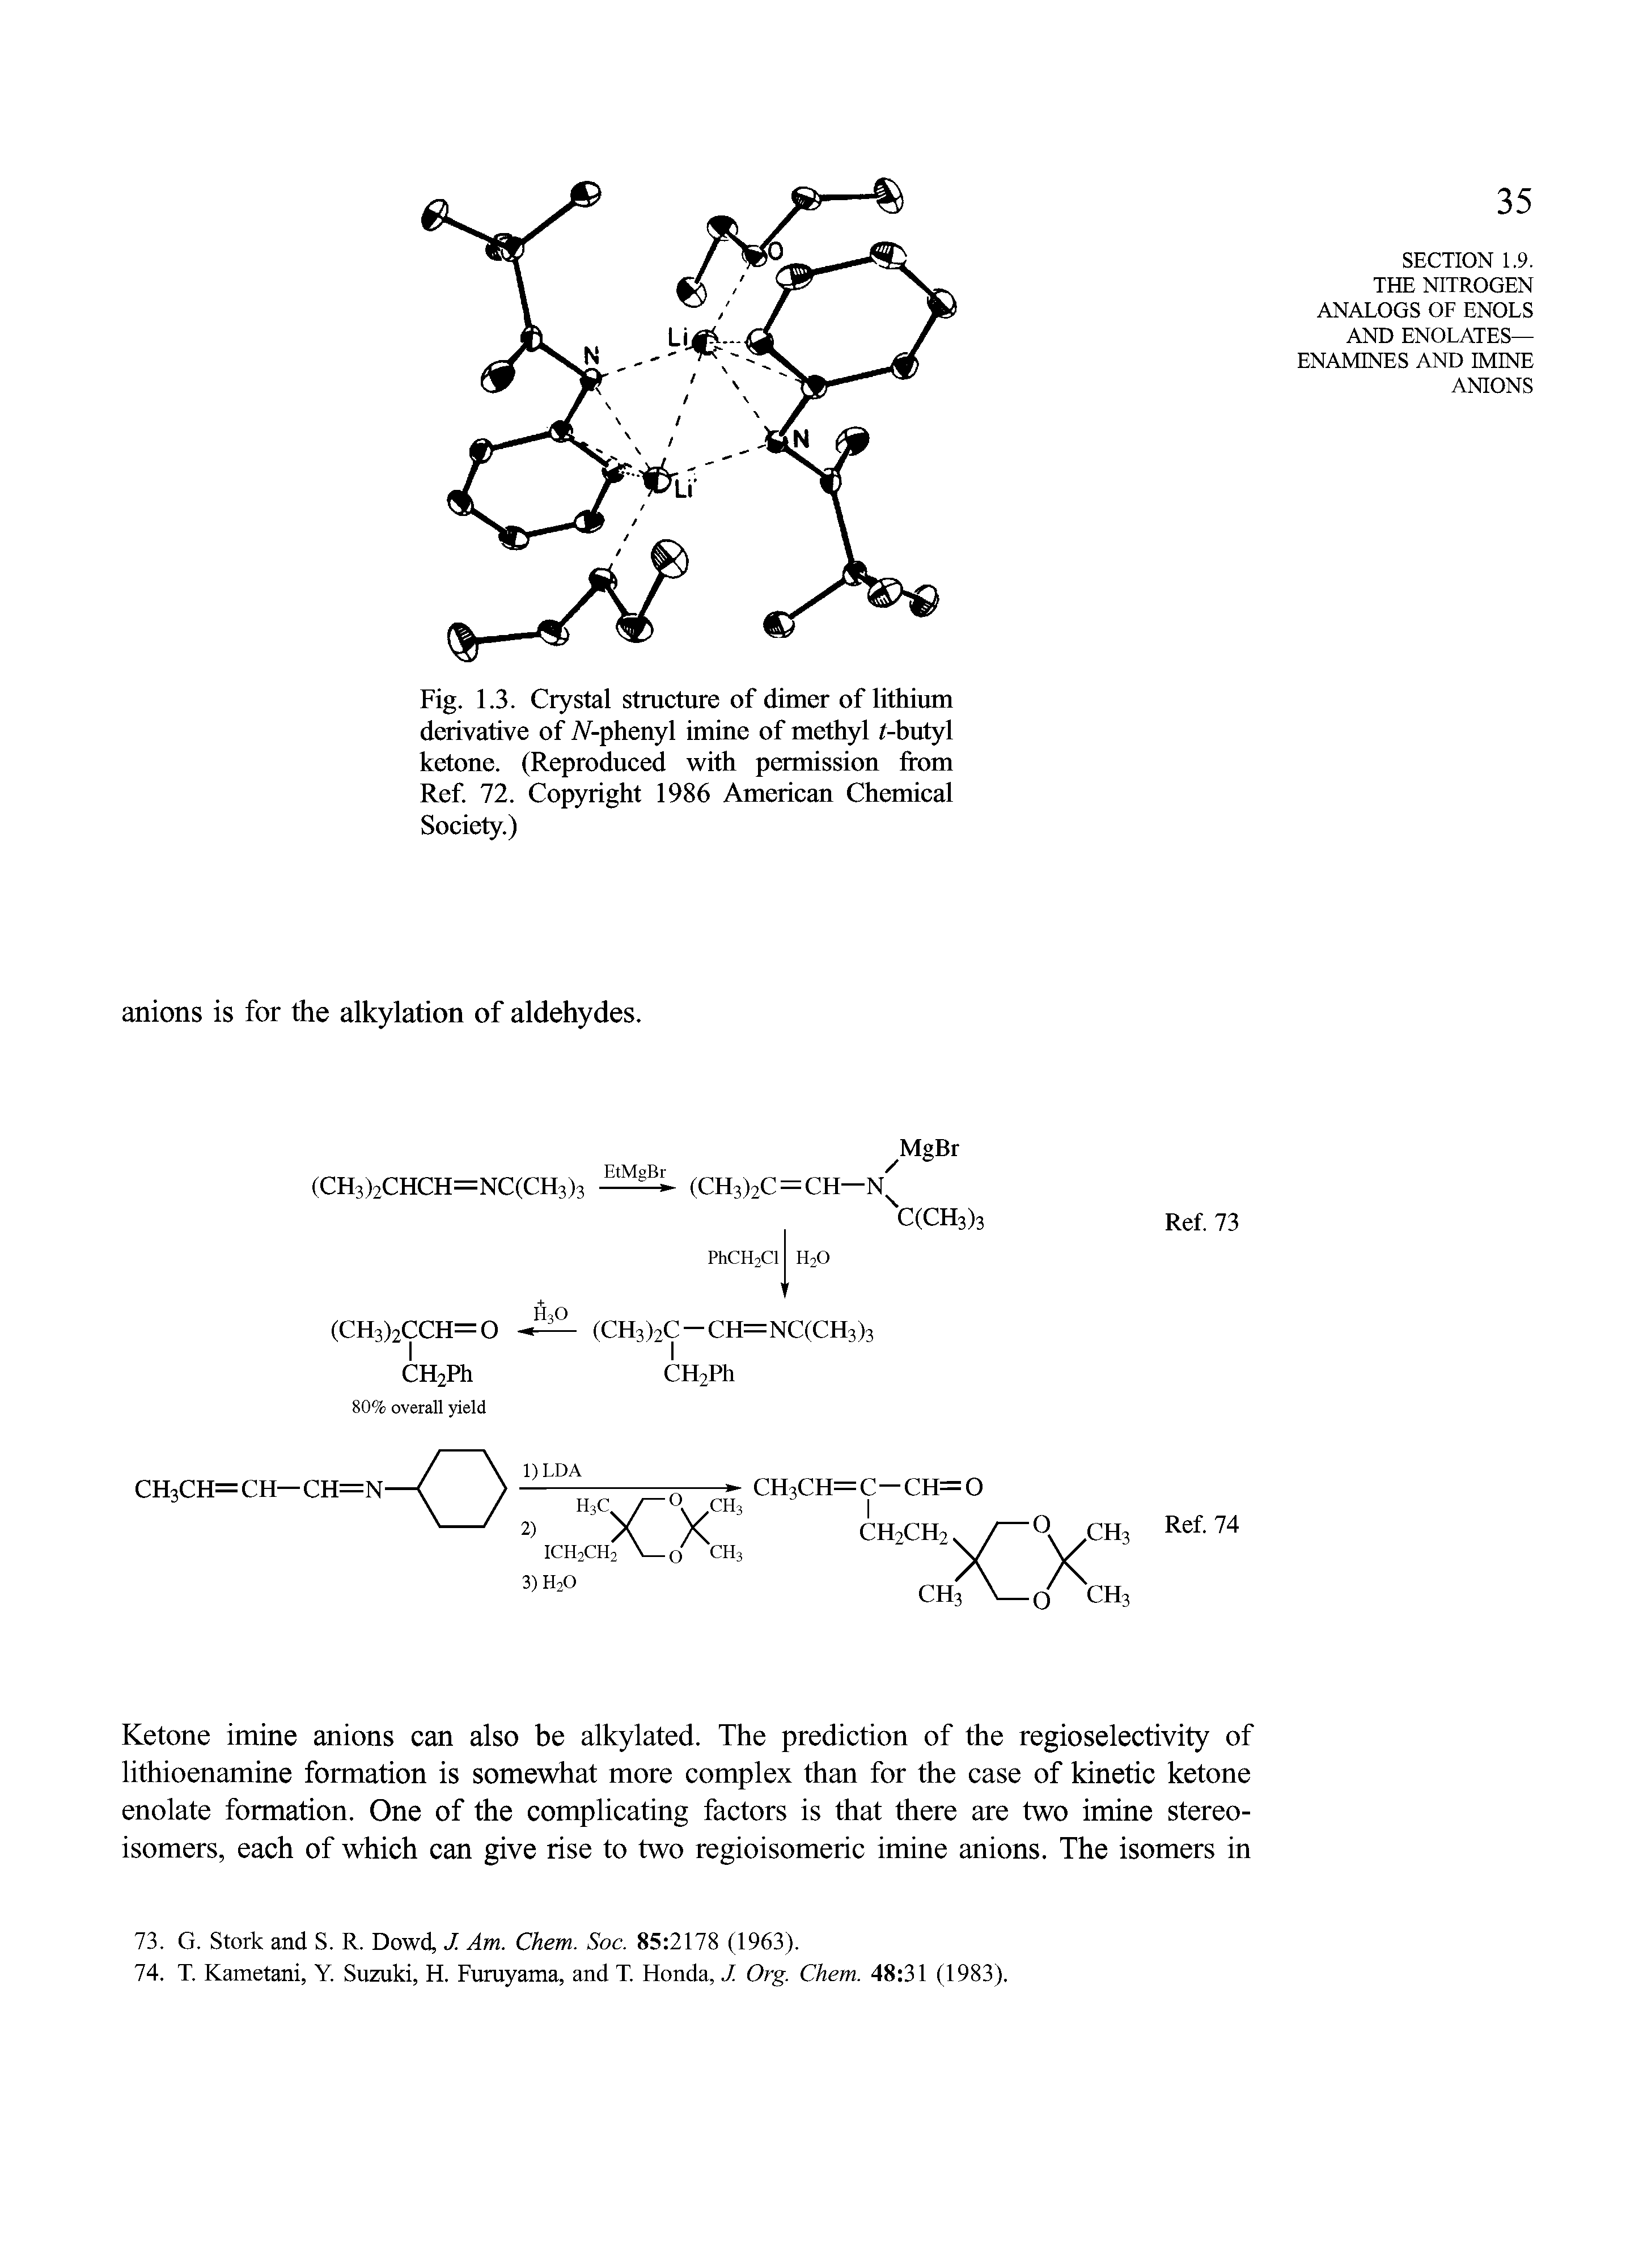 Fig. 1.3. Crystal structure of dimer of lithium derivative of TV-phenyl imine of methyl /-butyl ketone. (Reproduced with permission from Ref. 72. Copyright 1986 American Chemical Society.)...